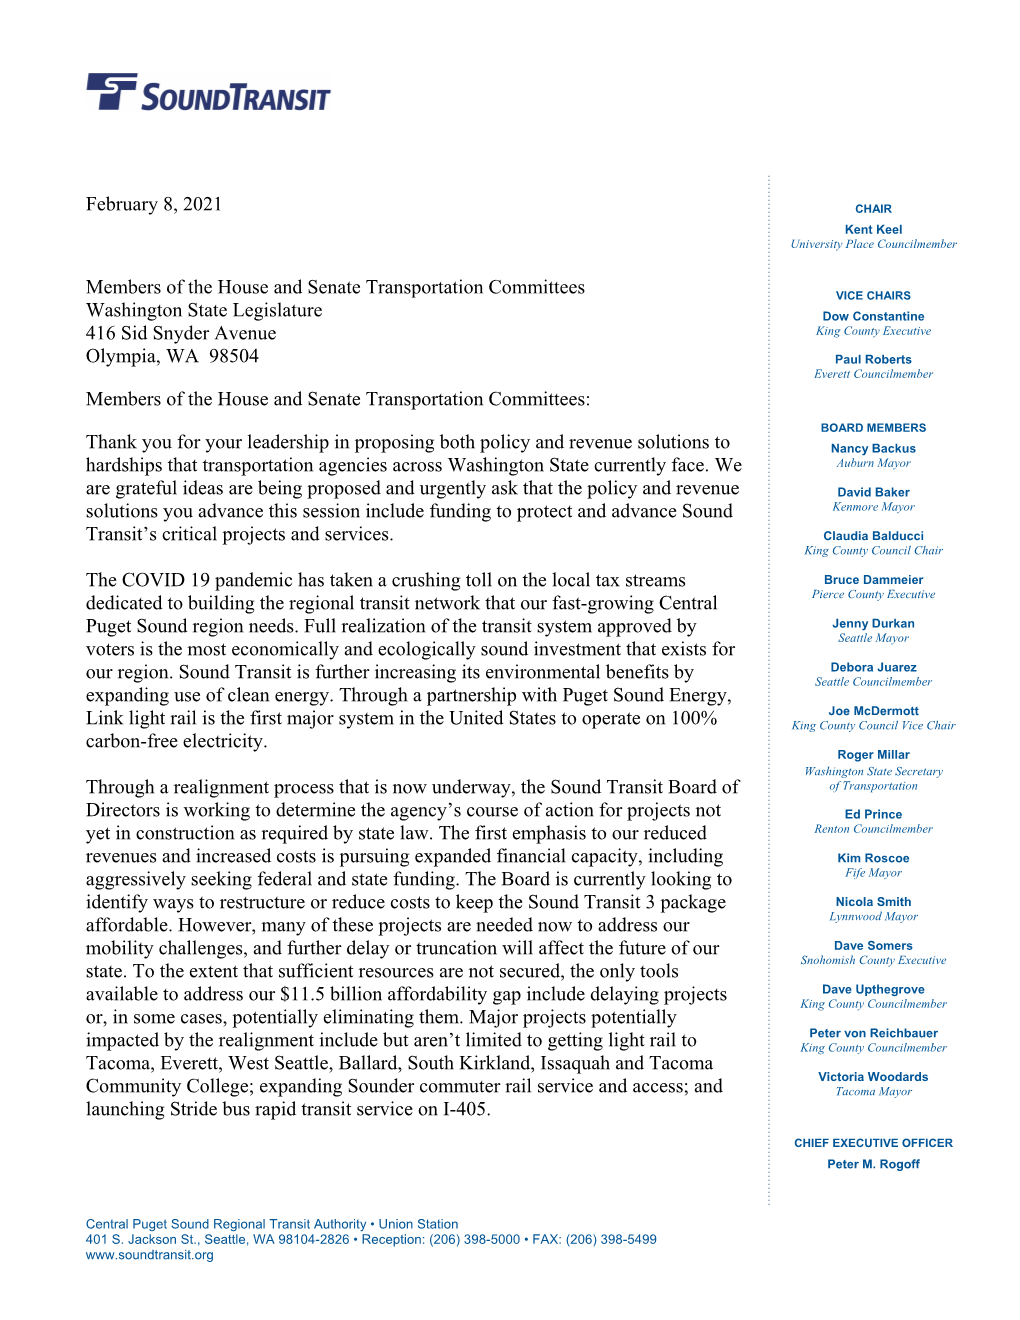 Letter from the Sound Transit Board to Members of the House and Senate